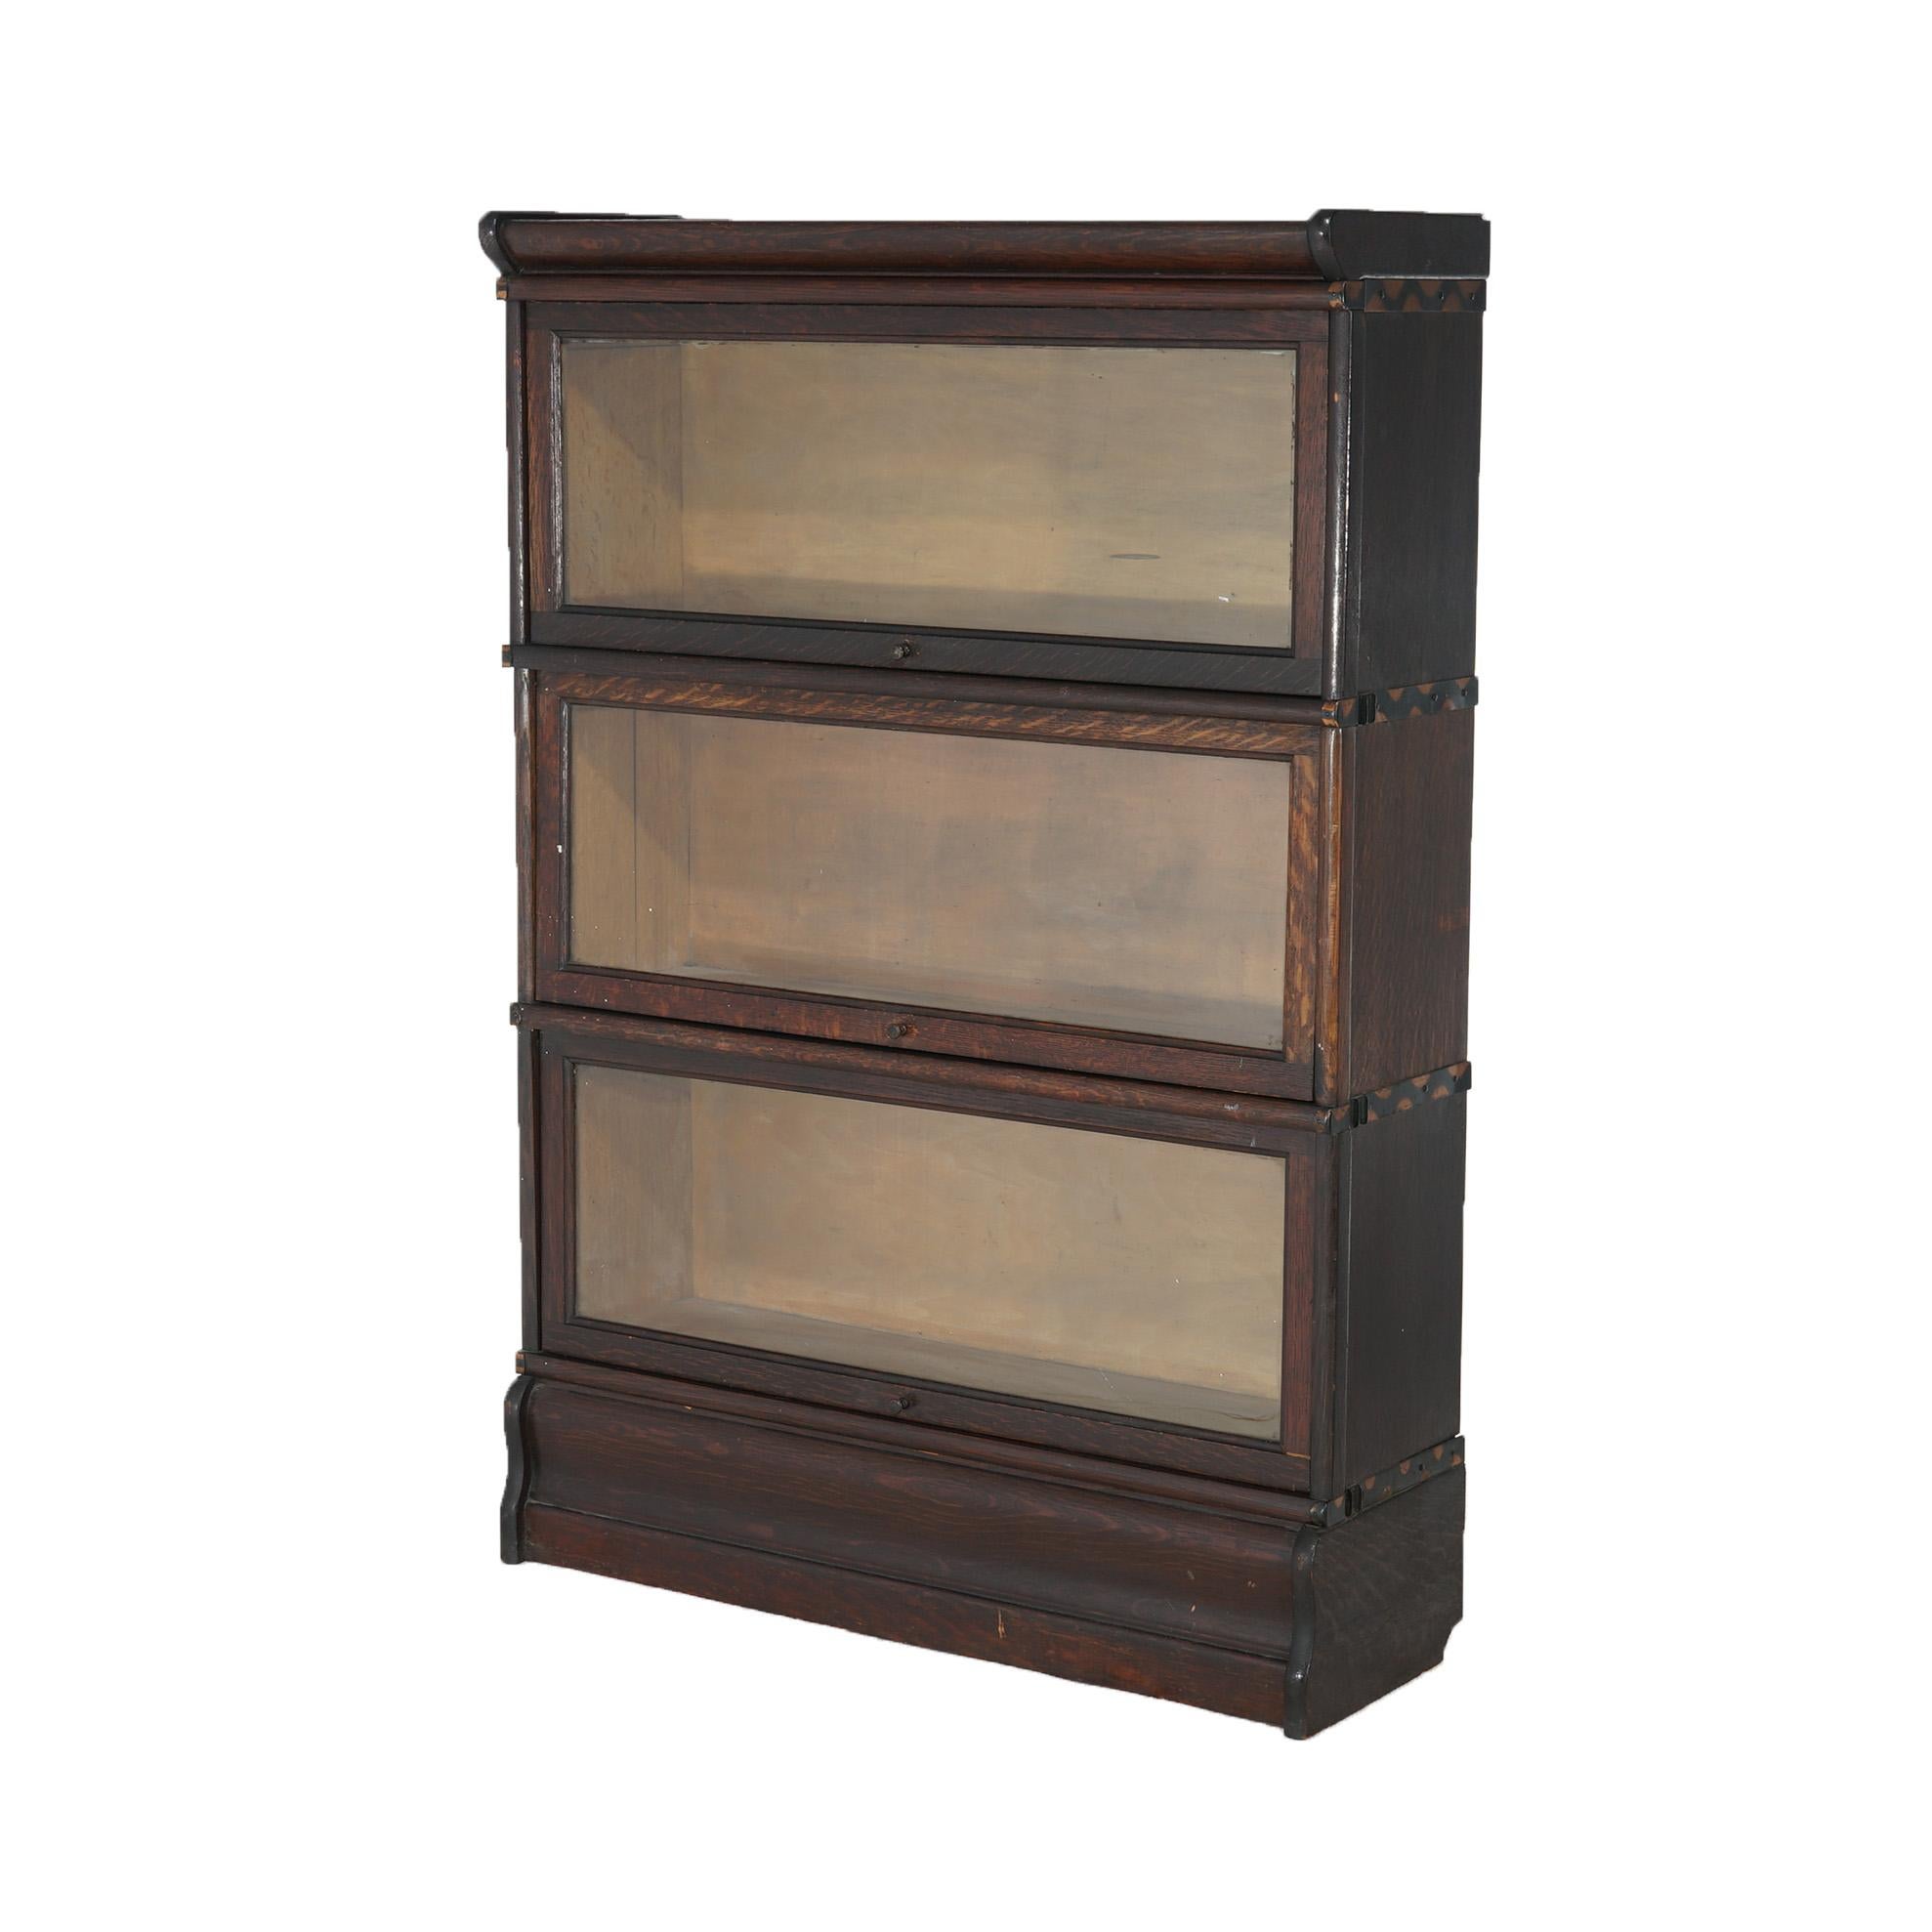 An antique Arts and Crafts Mission barrister bookcase by Macey offers oak construction with three stacks, each having pullout glass doors; raised on ogee base, maker label as photographed, c1910

Measures - overall 45.25